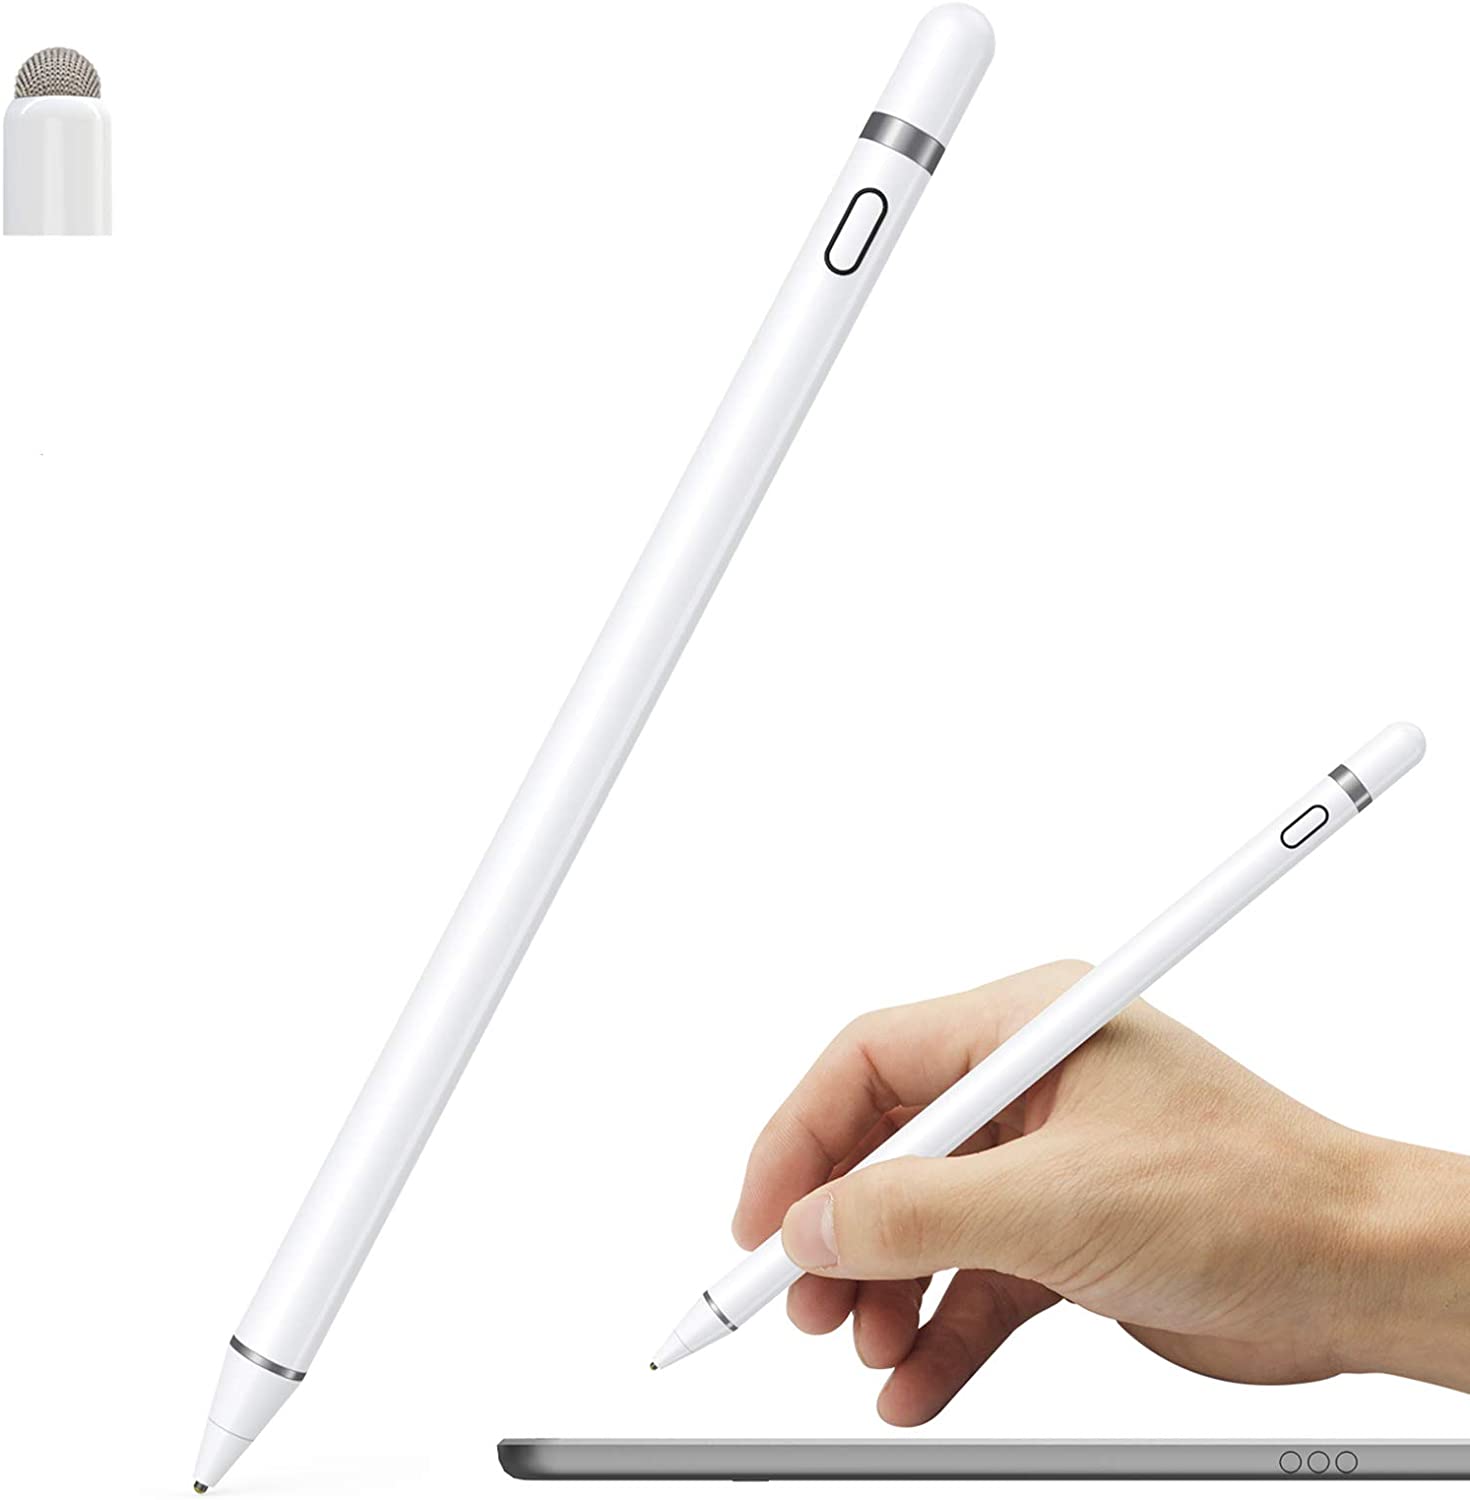 Factory For Pink Stylus Pen - Active Stylus Pen Compatible for iOS&Android Touch Screens, Pencil for iPad with Dual Touch Function,Rechargeable Stylus for iPad/iPad Pro/Air/Mini/iPhone/Cellpho...